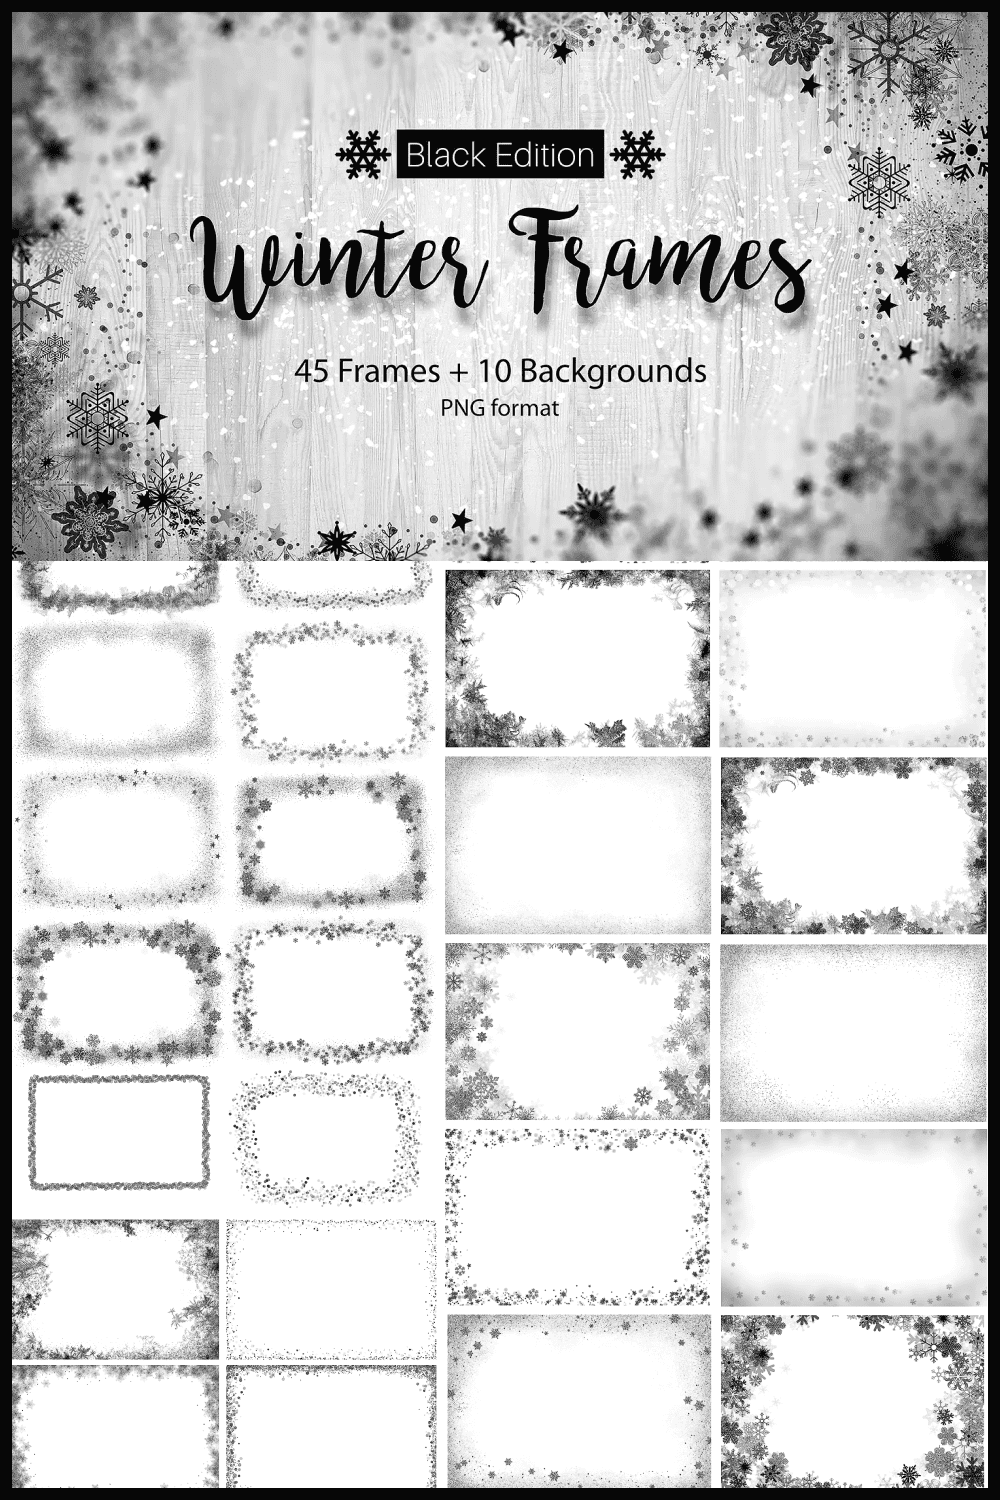 Black and Grey Frames and Backgrounds with Snowflakes.